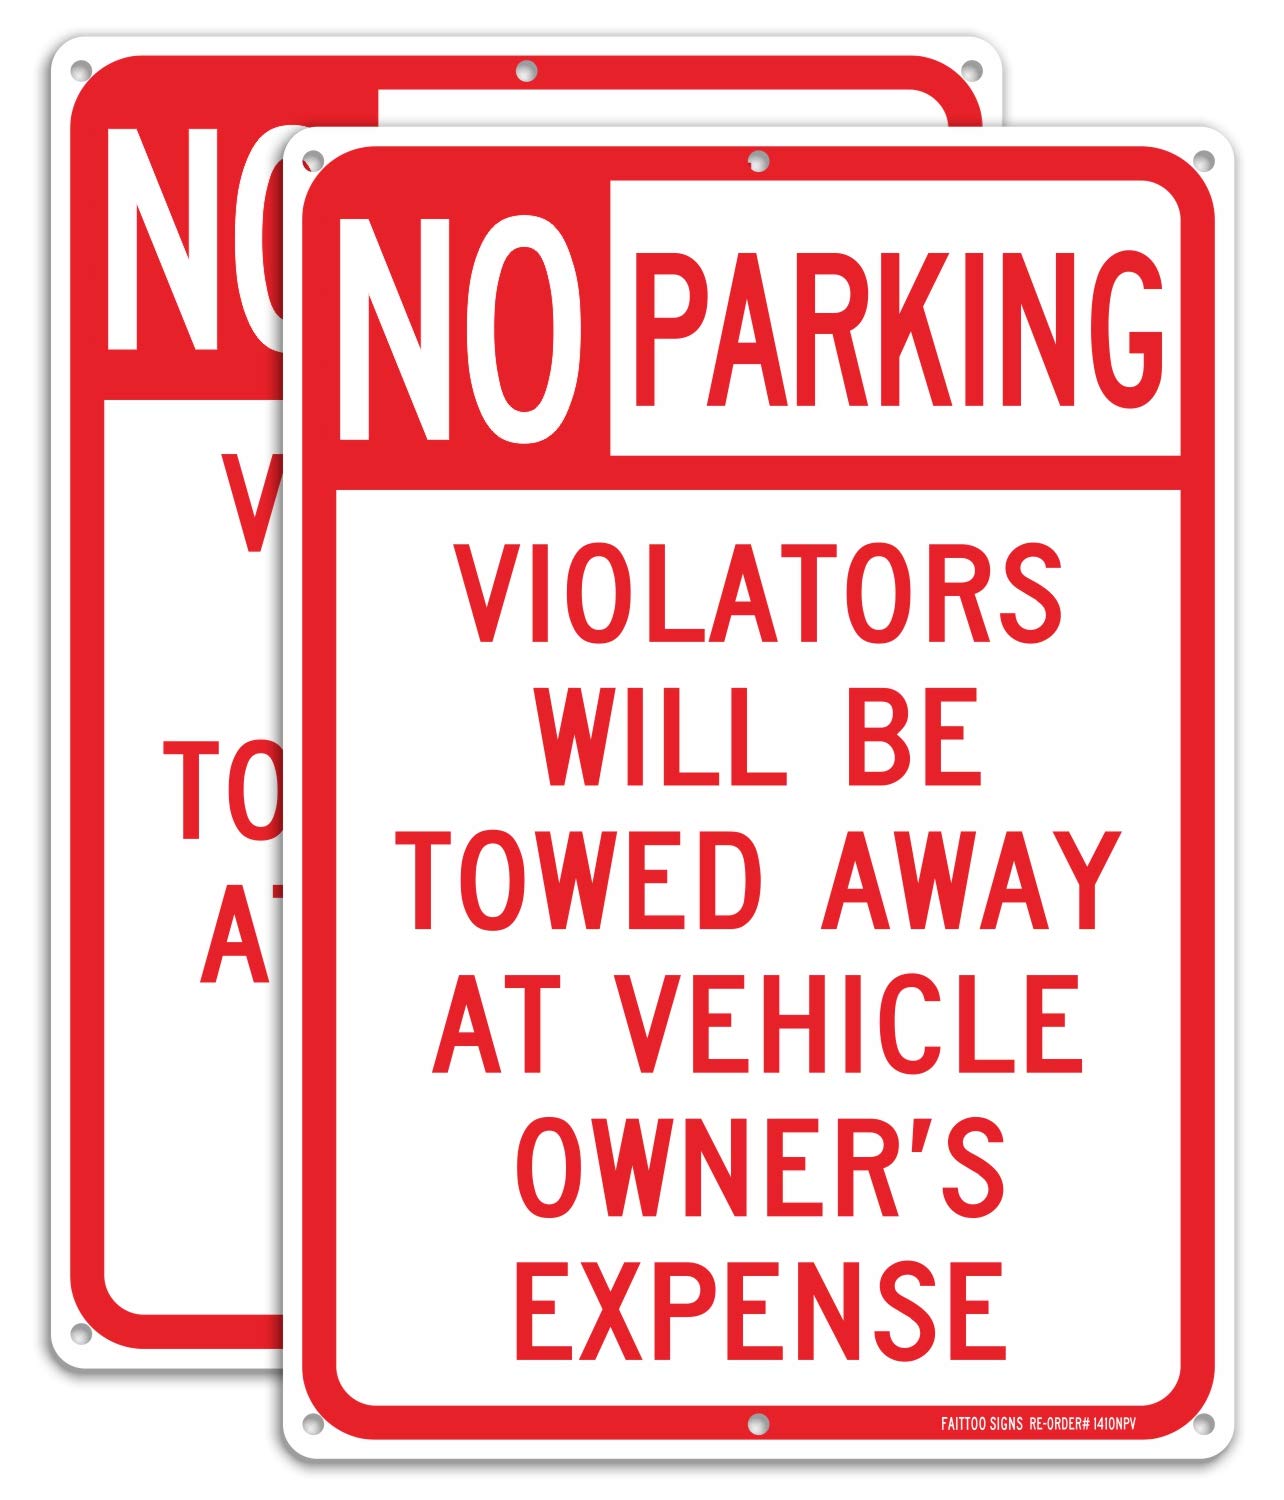 No Parking Sign 2 Pack, Violators Will Be Towed Away at Vehicle Owners Expense, 14 X 10 Reflective .40 Rust Free Aluminum, UV Protected, Weather Resistant, Waterproof, Durable Ink，Easy to Mount